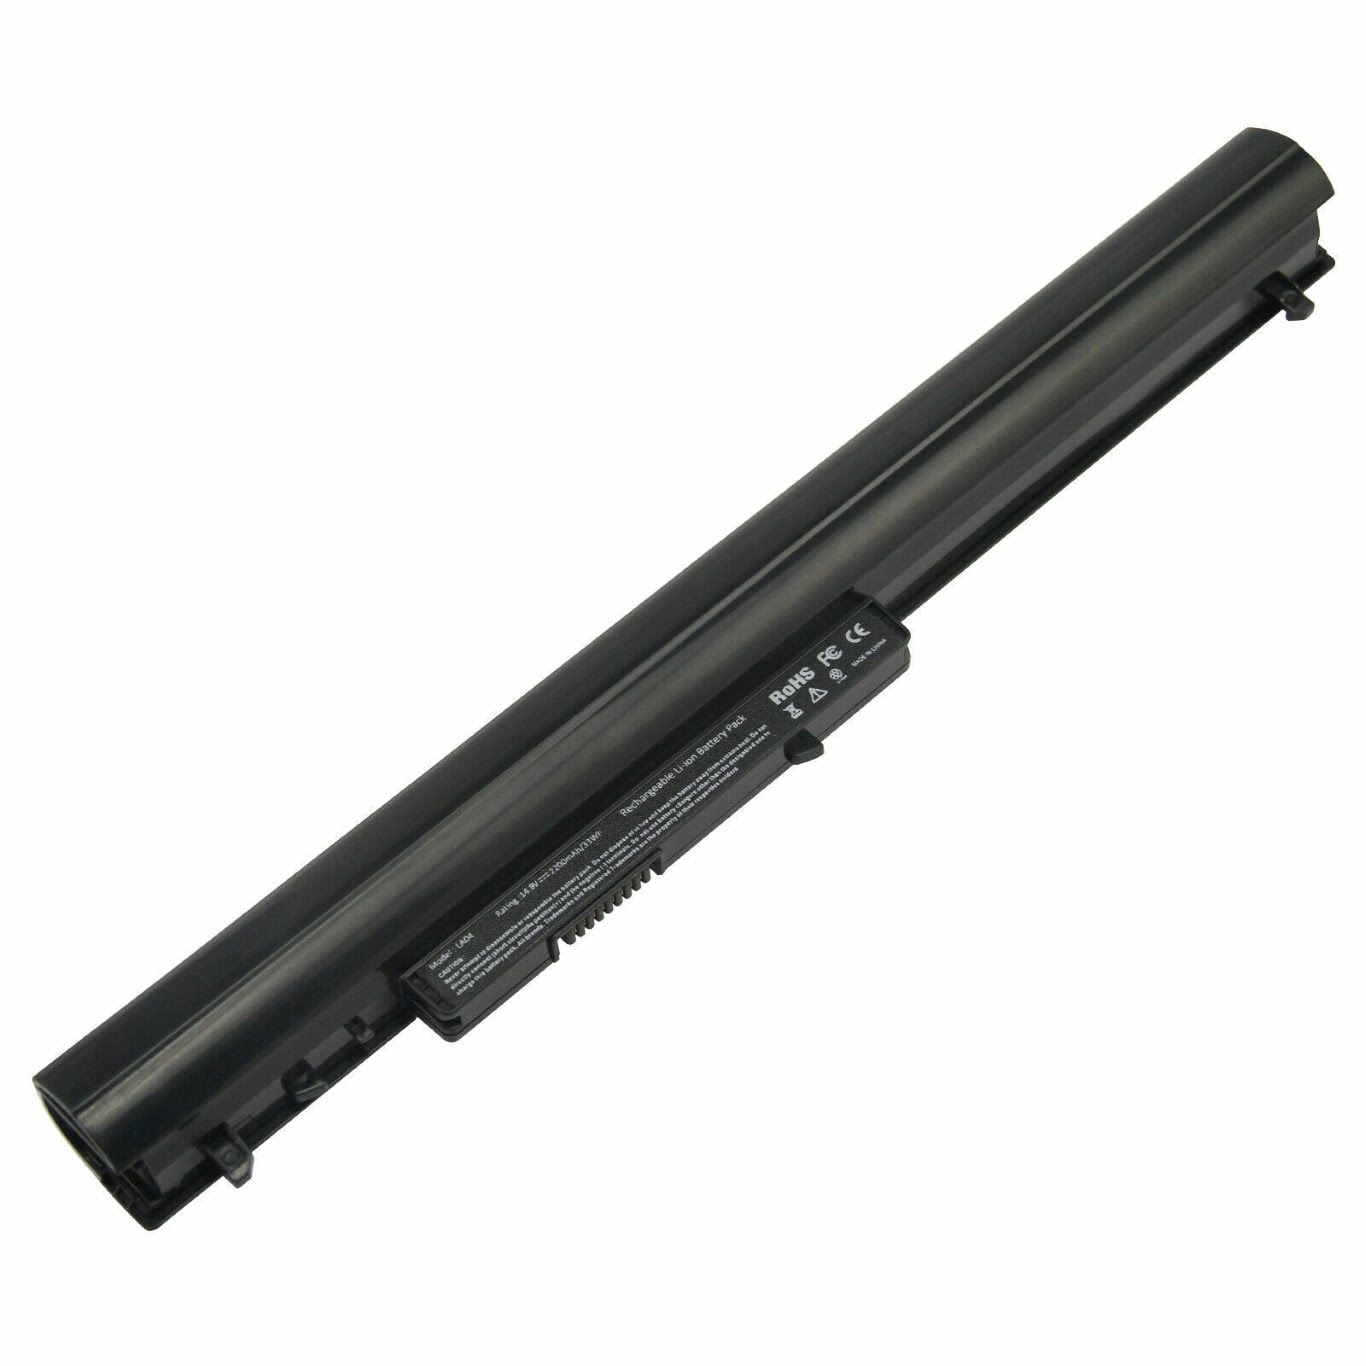 28460-001, 728460-001 replacement Laptop Battery for HP 248 G1 Series, 248 Series, 14.8 V, 2200 Mah, 4 cells